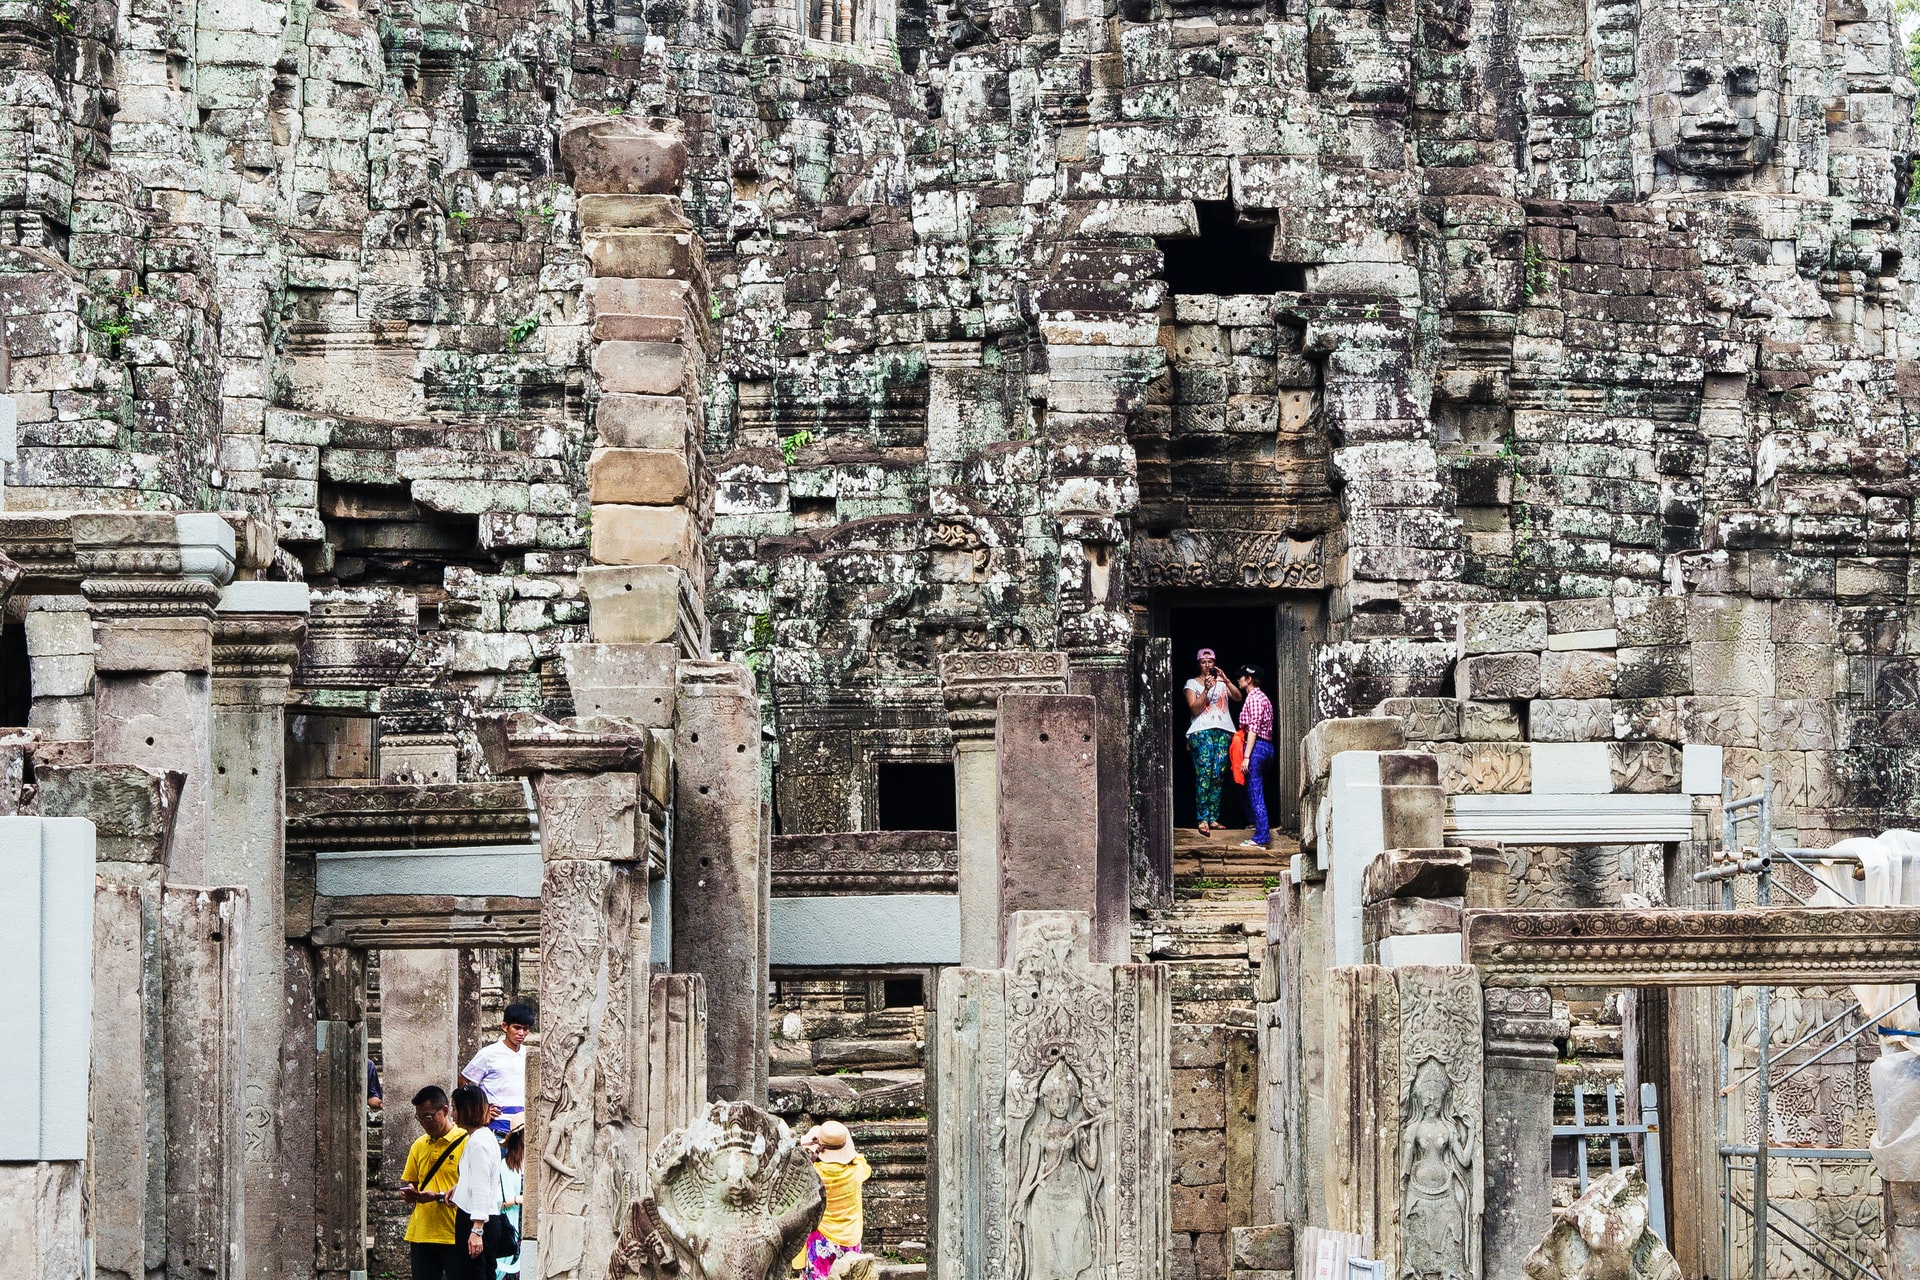 Tourists in Angkor Thom, Cambodia